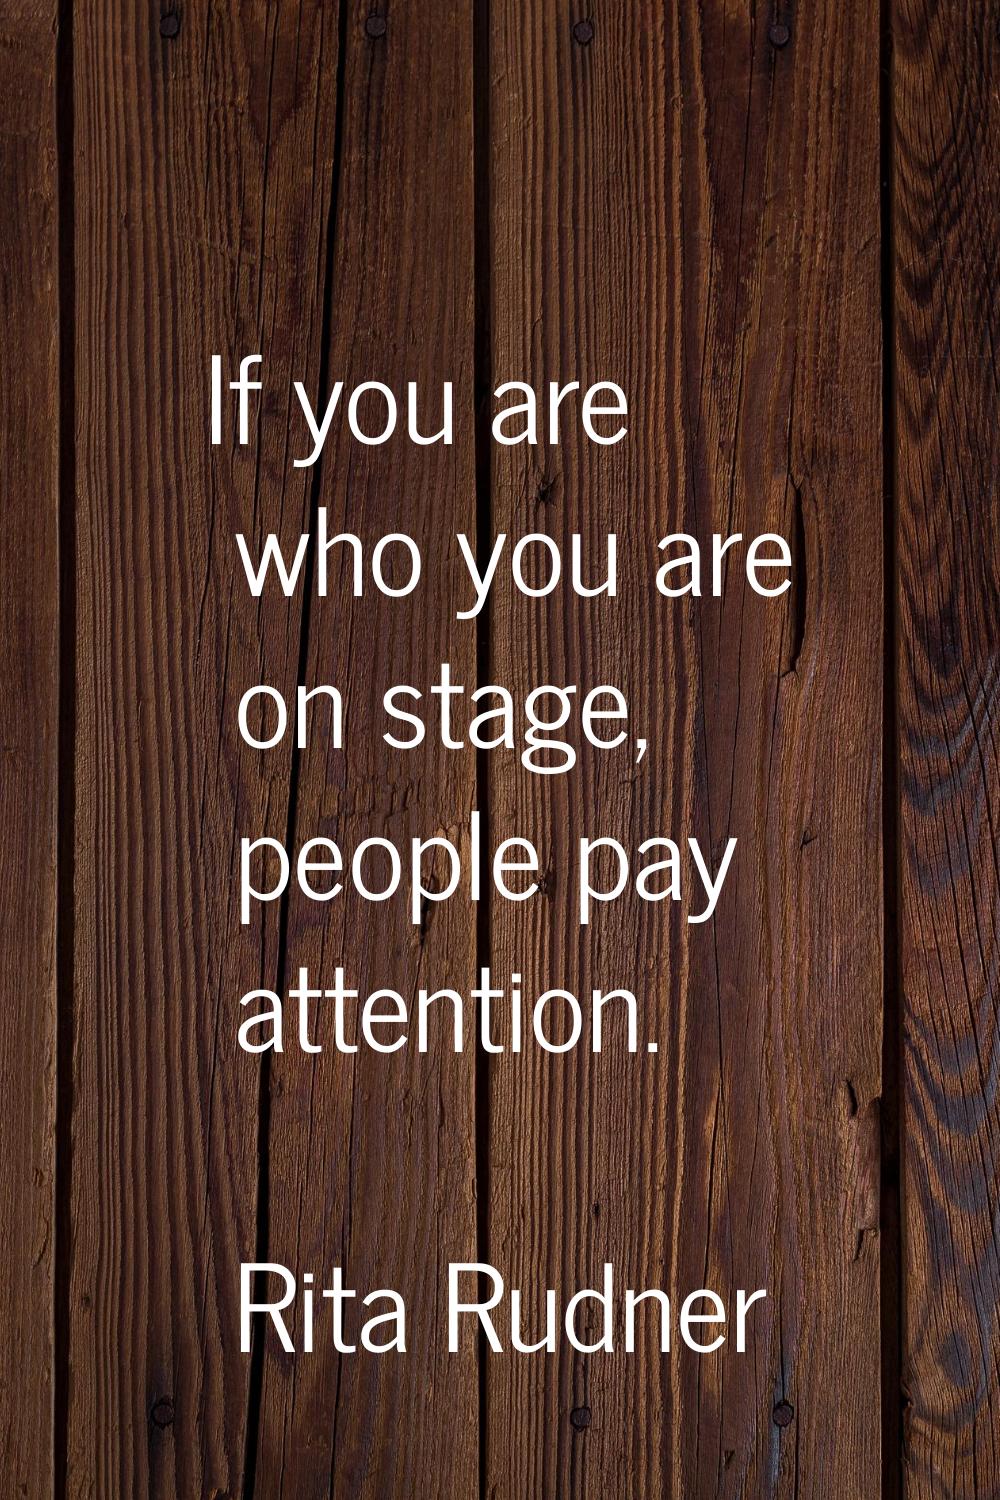 If you are who you are on stage, people pay attention.